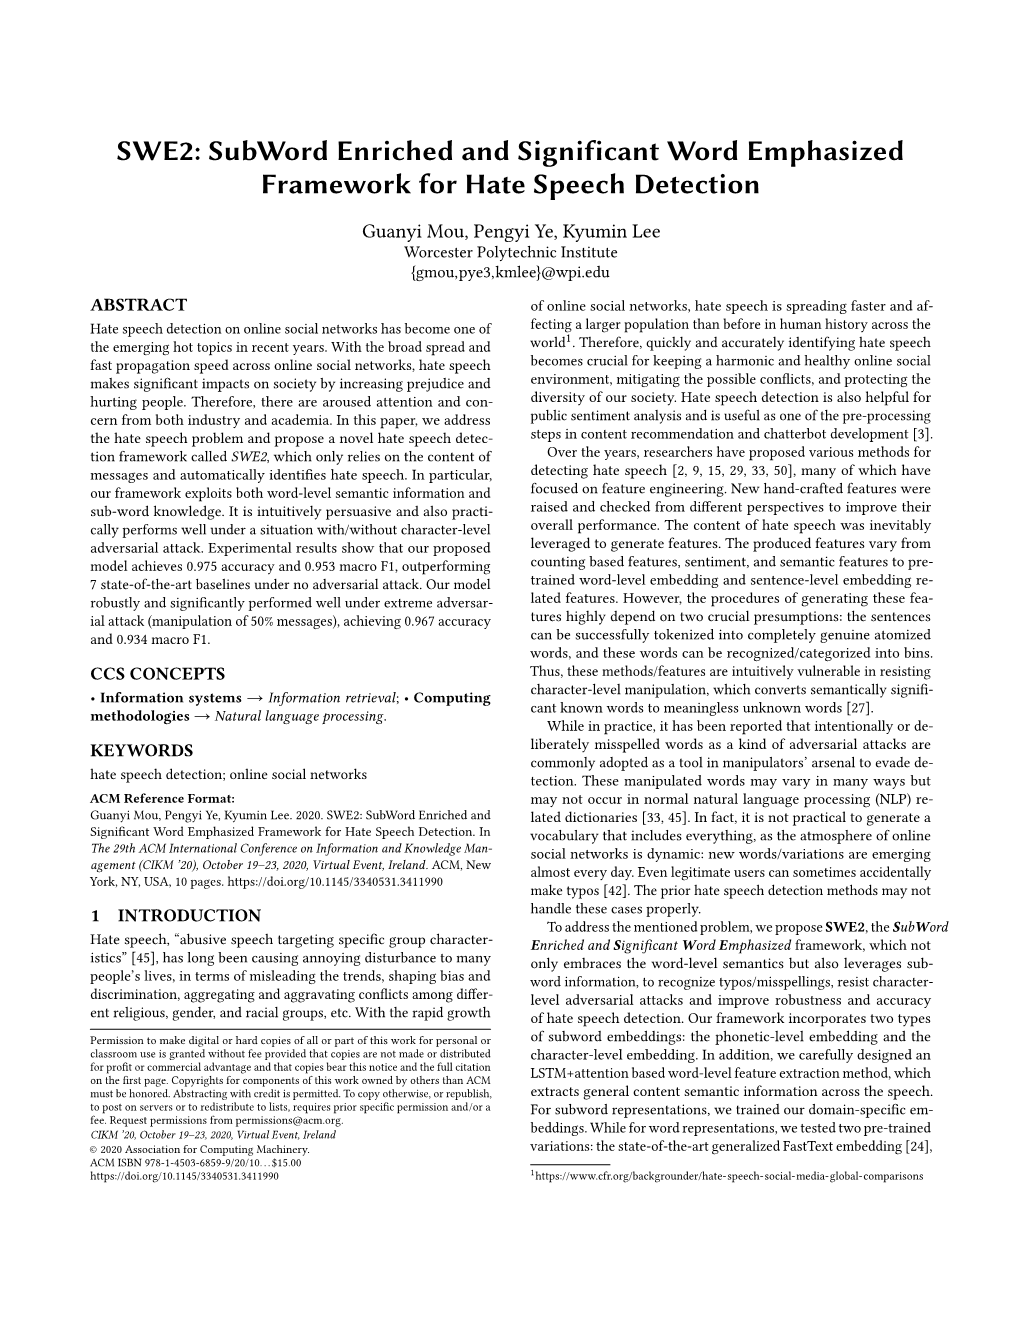 Subword Enriched and Significant Word Emphasized Framework for Hate Speech Detection